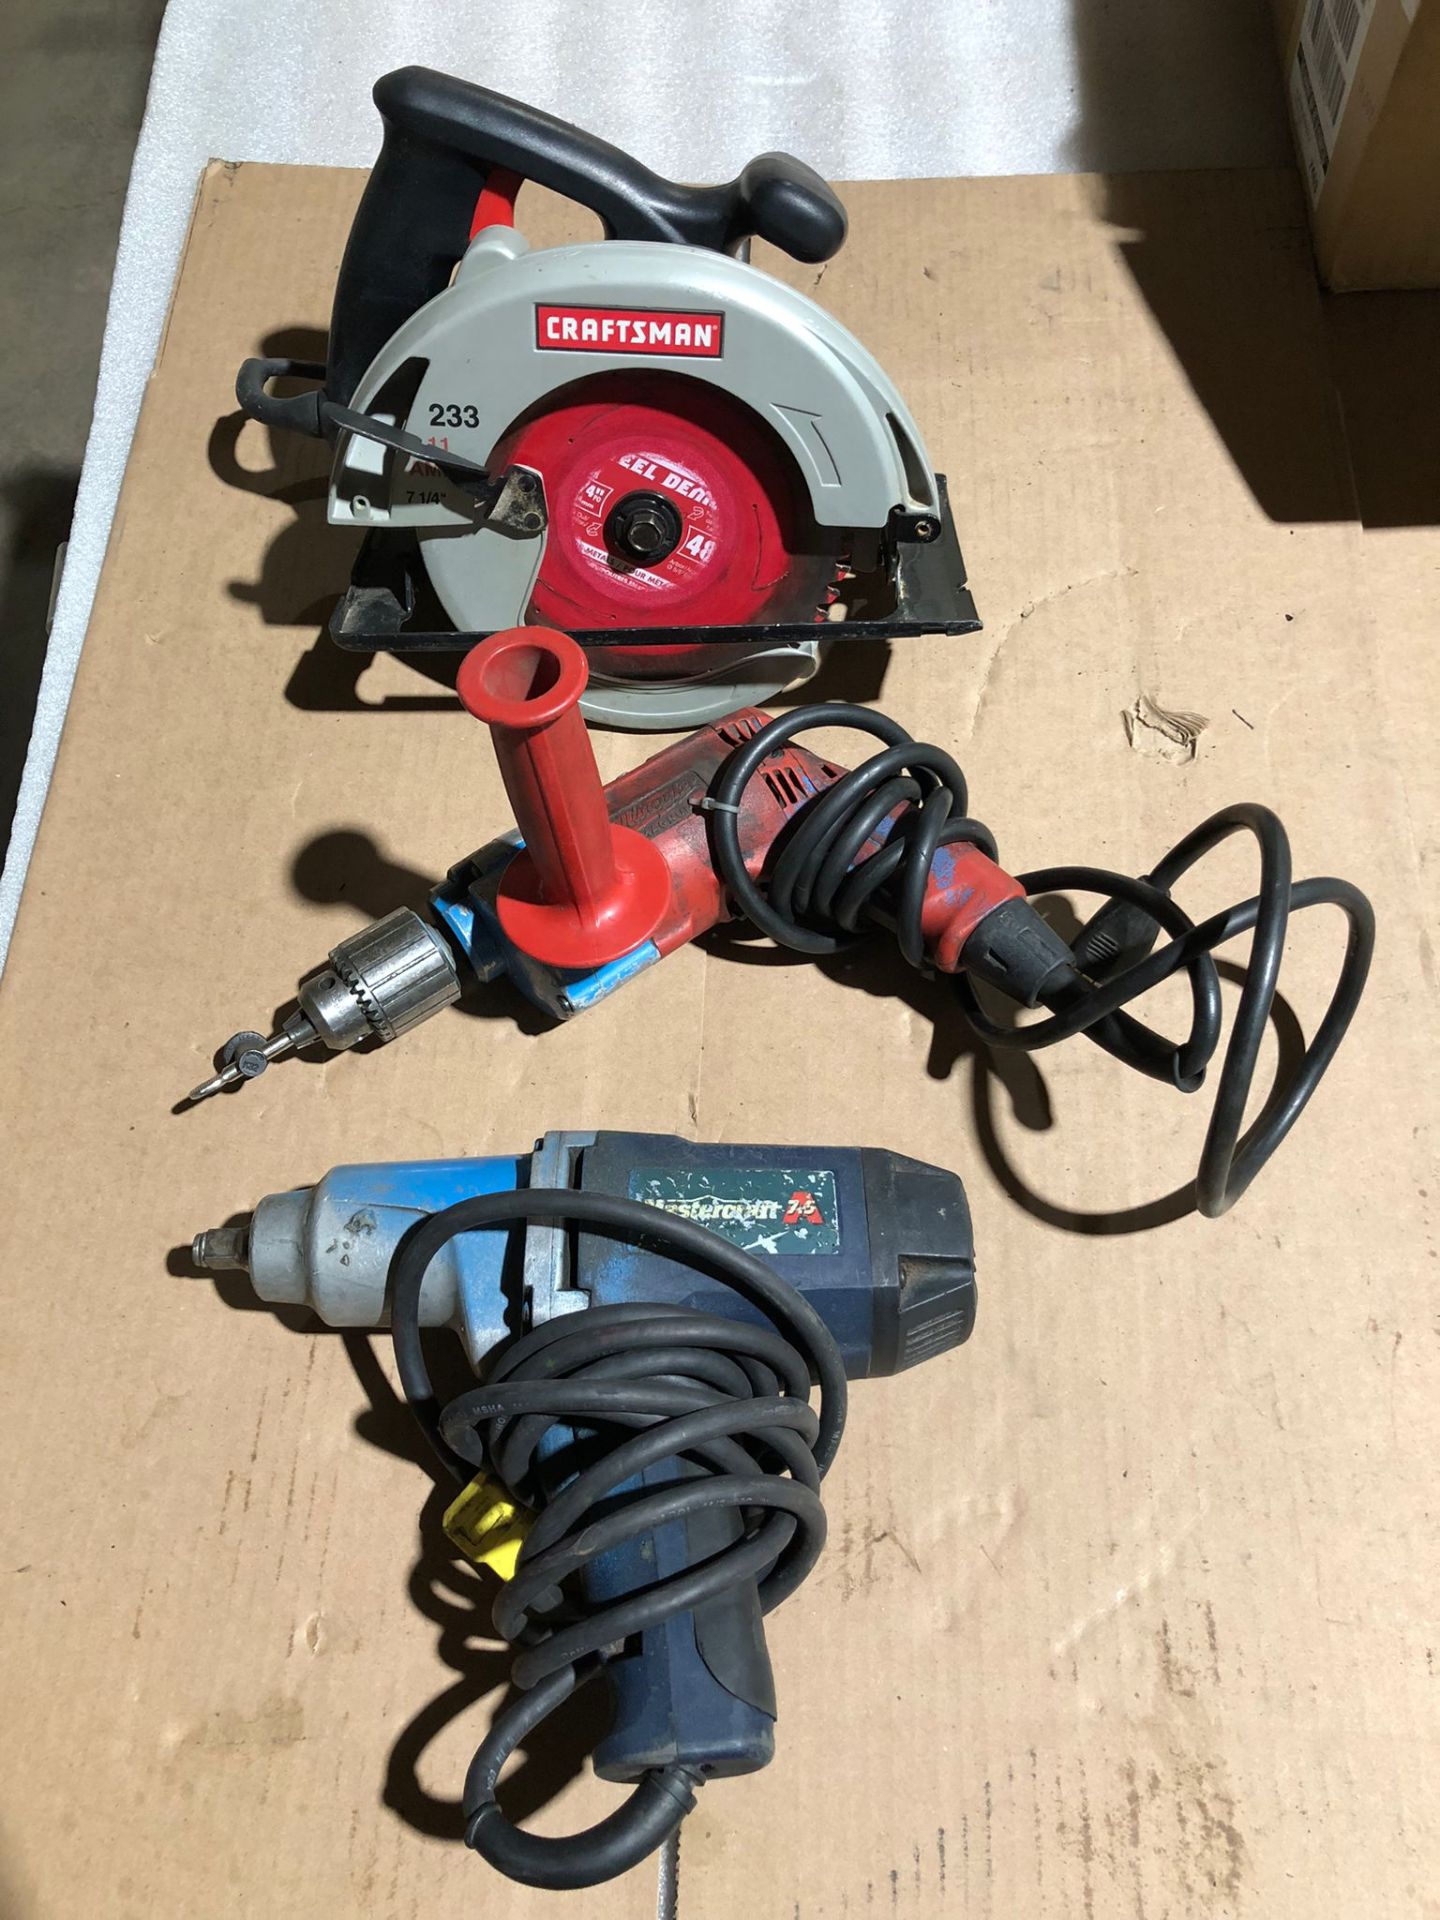 Lot of 3 (3 units) Milwaukee and more Hand Tools - Electric Impact driver, drill and Circular saw - Image 2 of 2